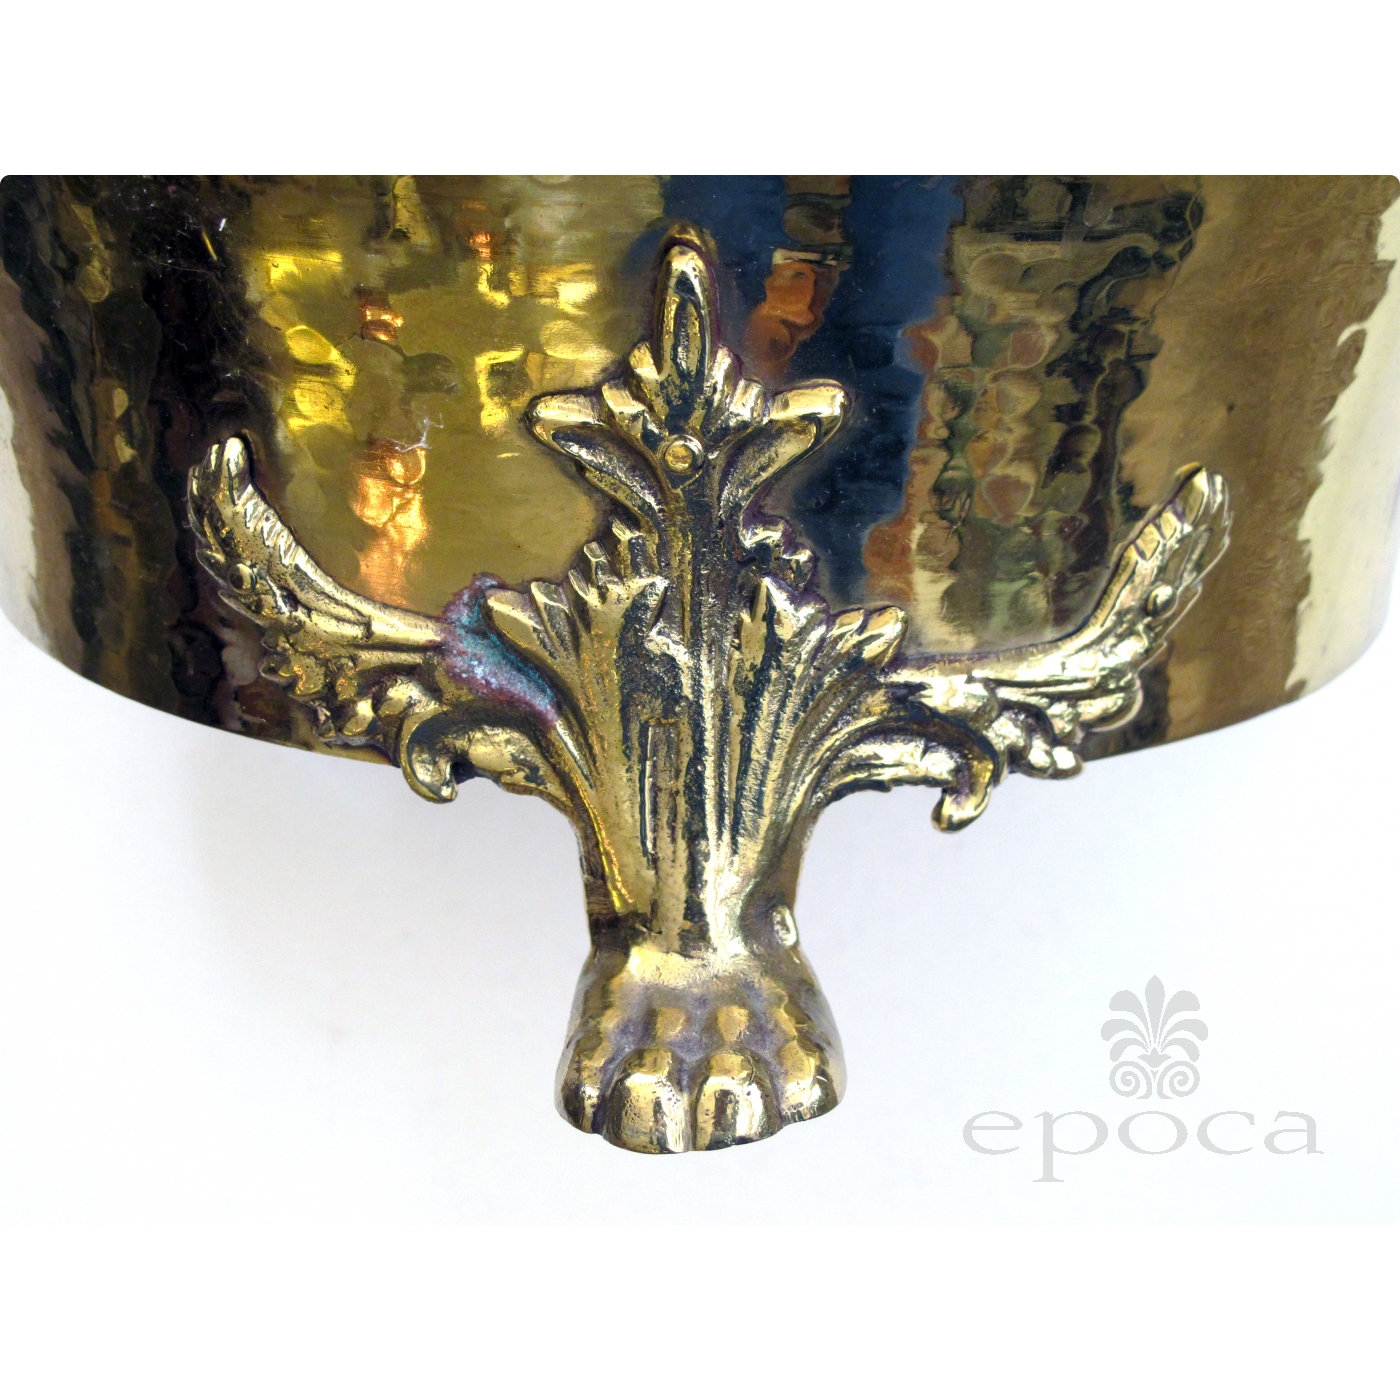 a rare and large-scaled imperial russian hand-hammered brass jardiniere  with lion head mounts; imperial russia stamp, city of Tula (in Cyrillic)  epoca antiques & 20th century furnishings san francisco